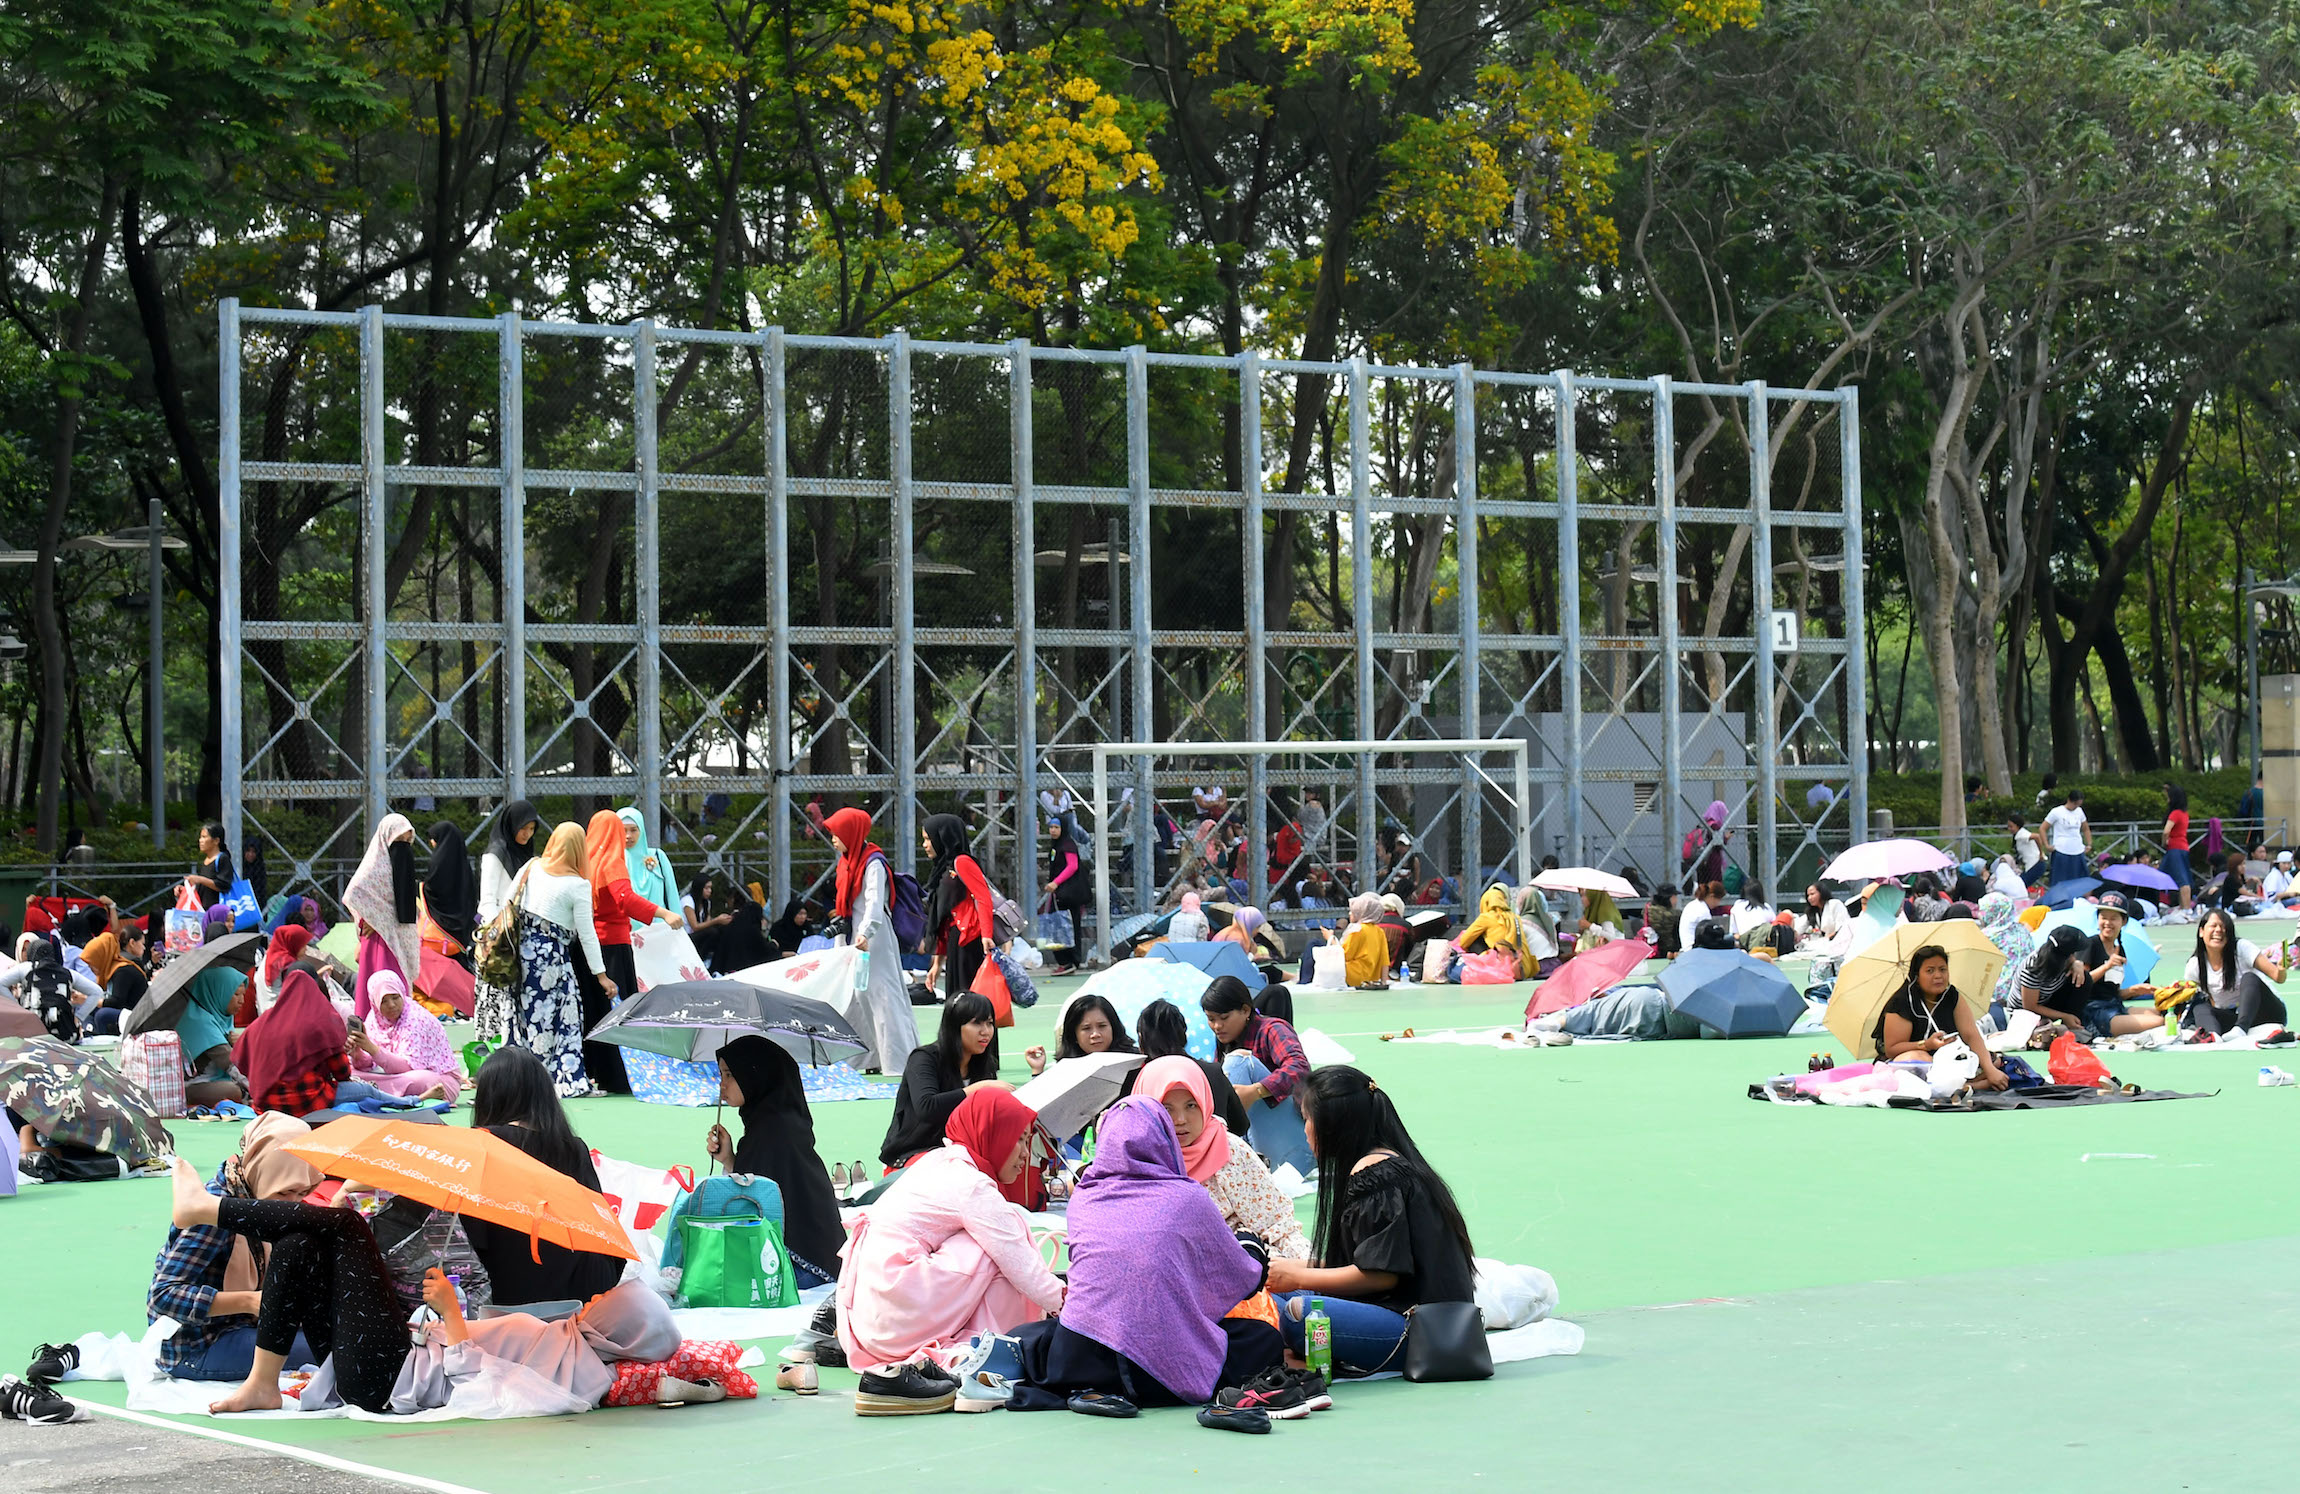 Domestic workers gather on their rest day at Victoria Park in Causeway Bay. Photo via the Hong Kong government’s Information Services Department